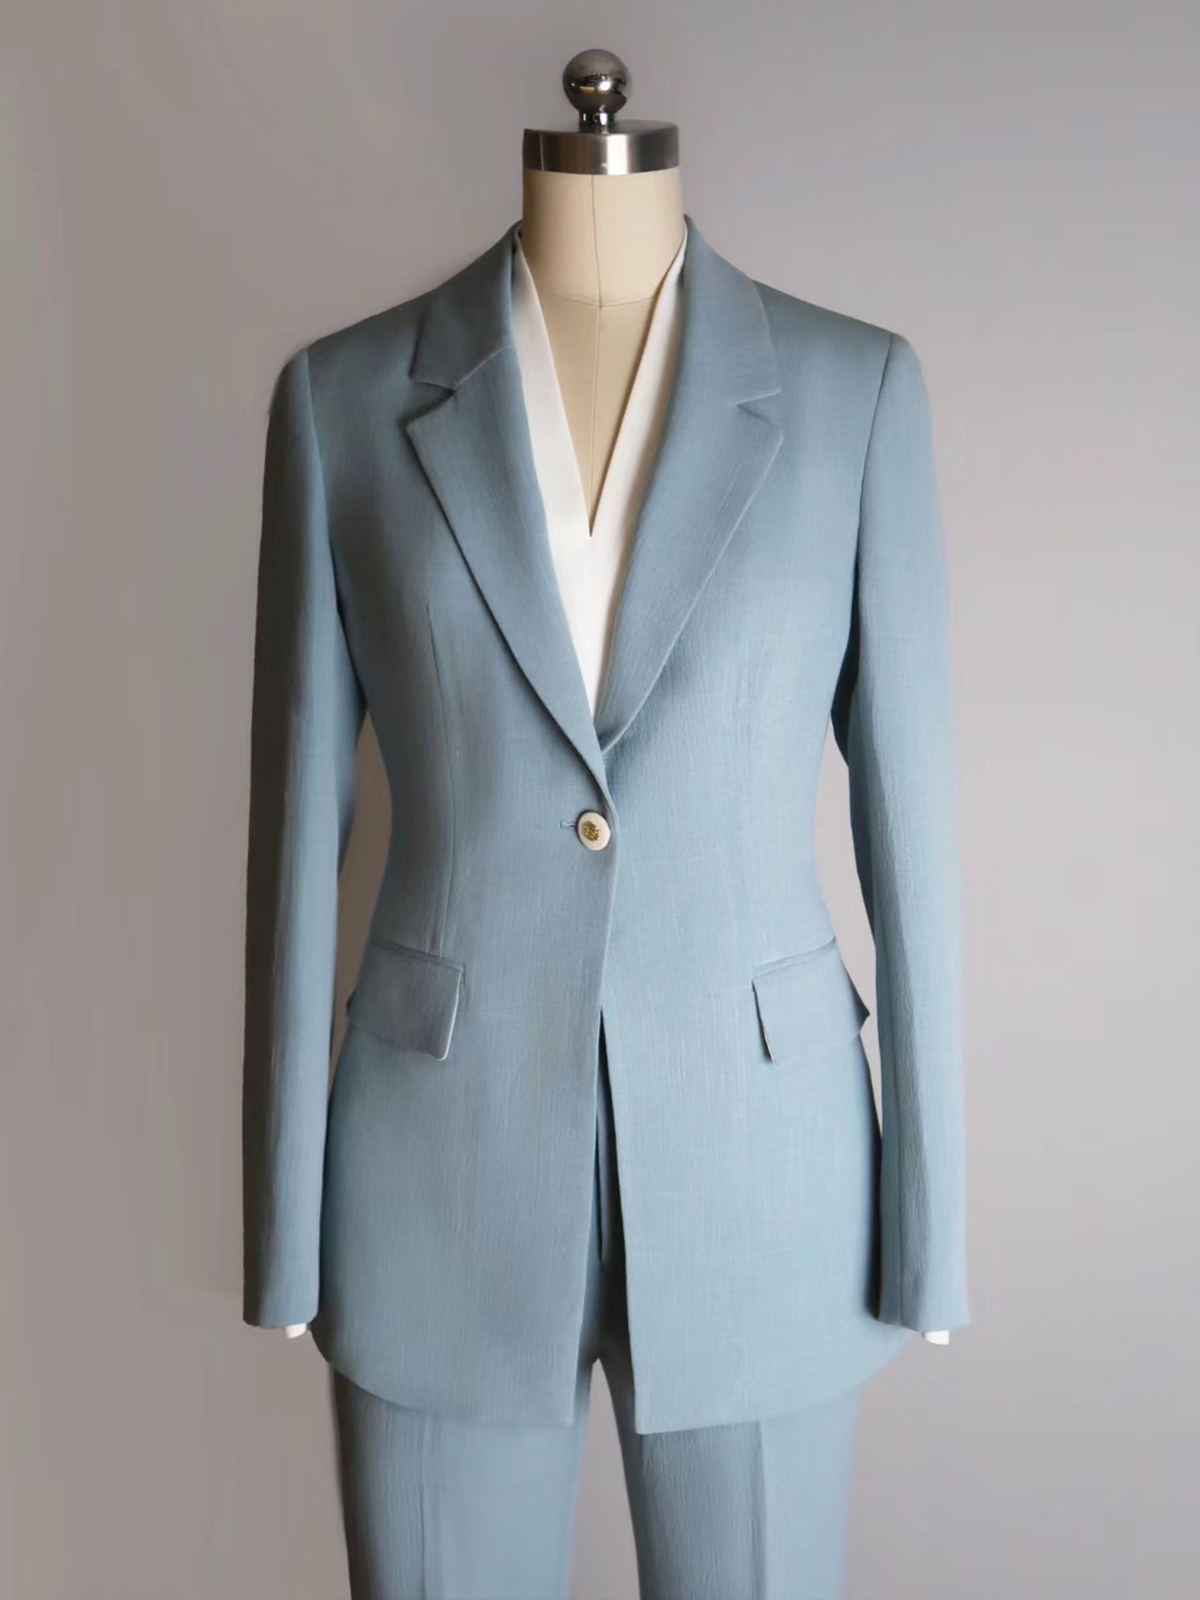 【Green Label】Fashion Style Business Women's Suit